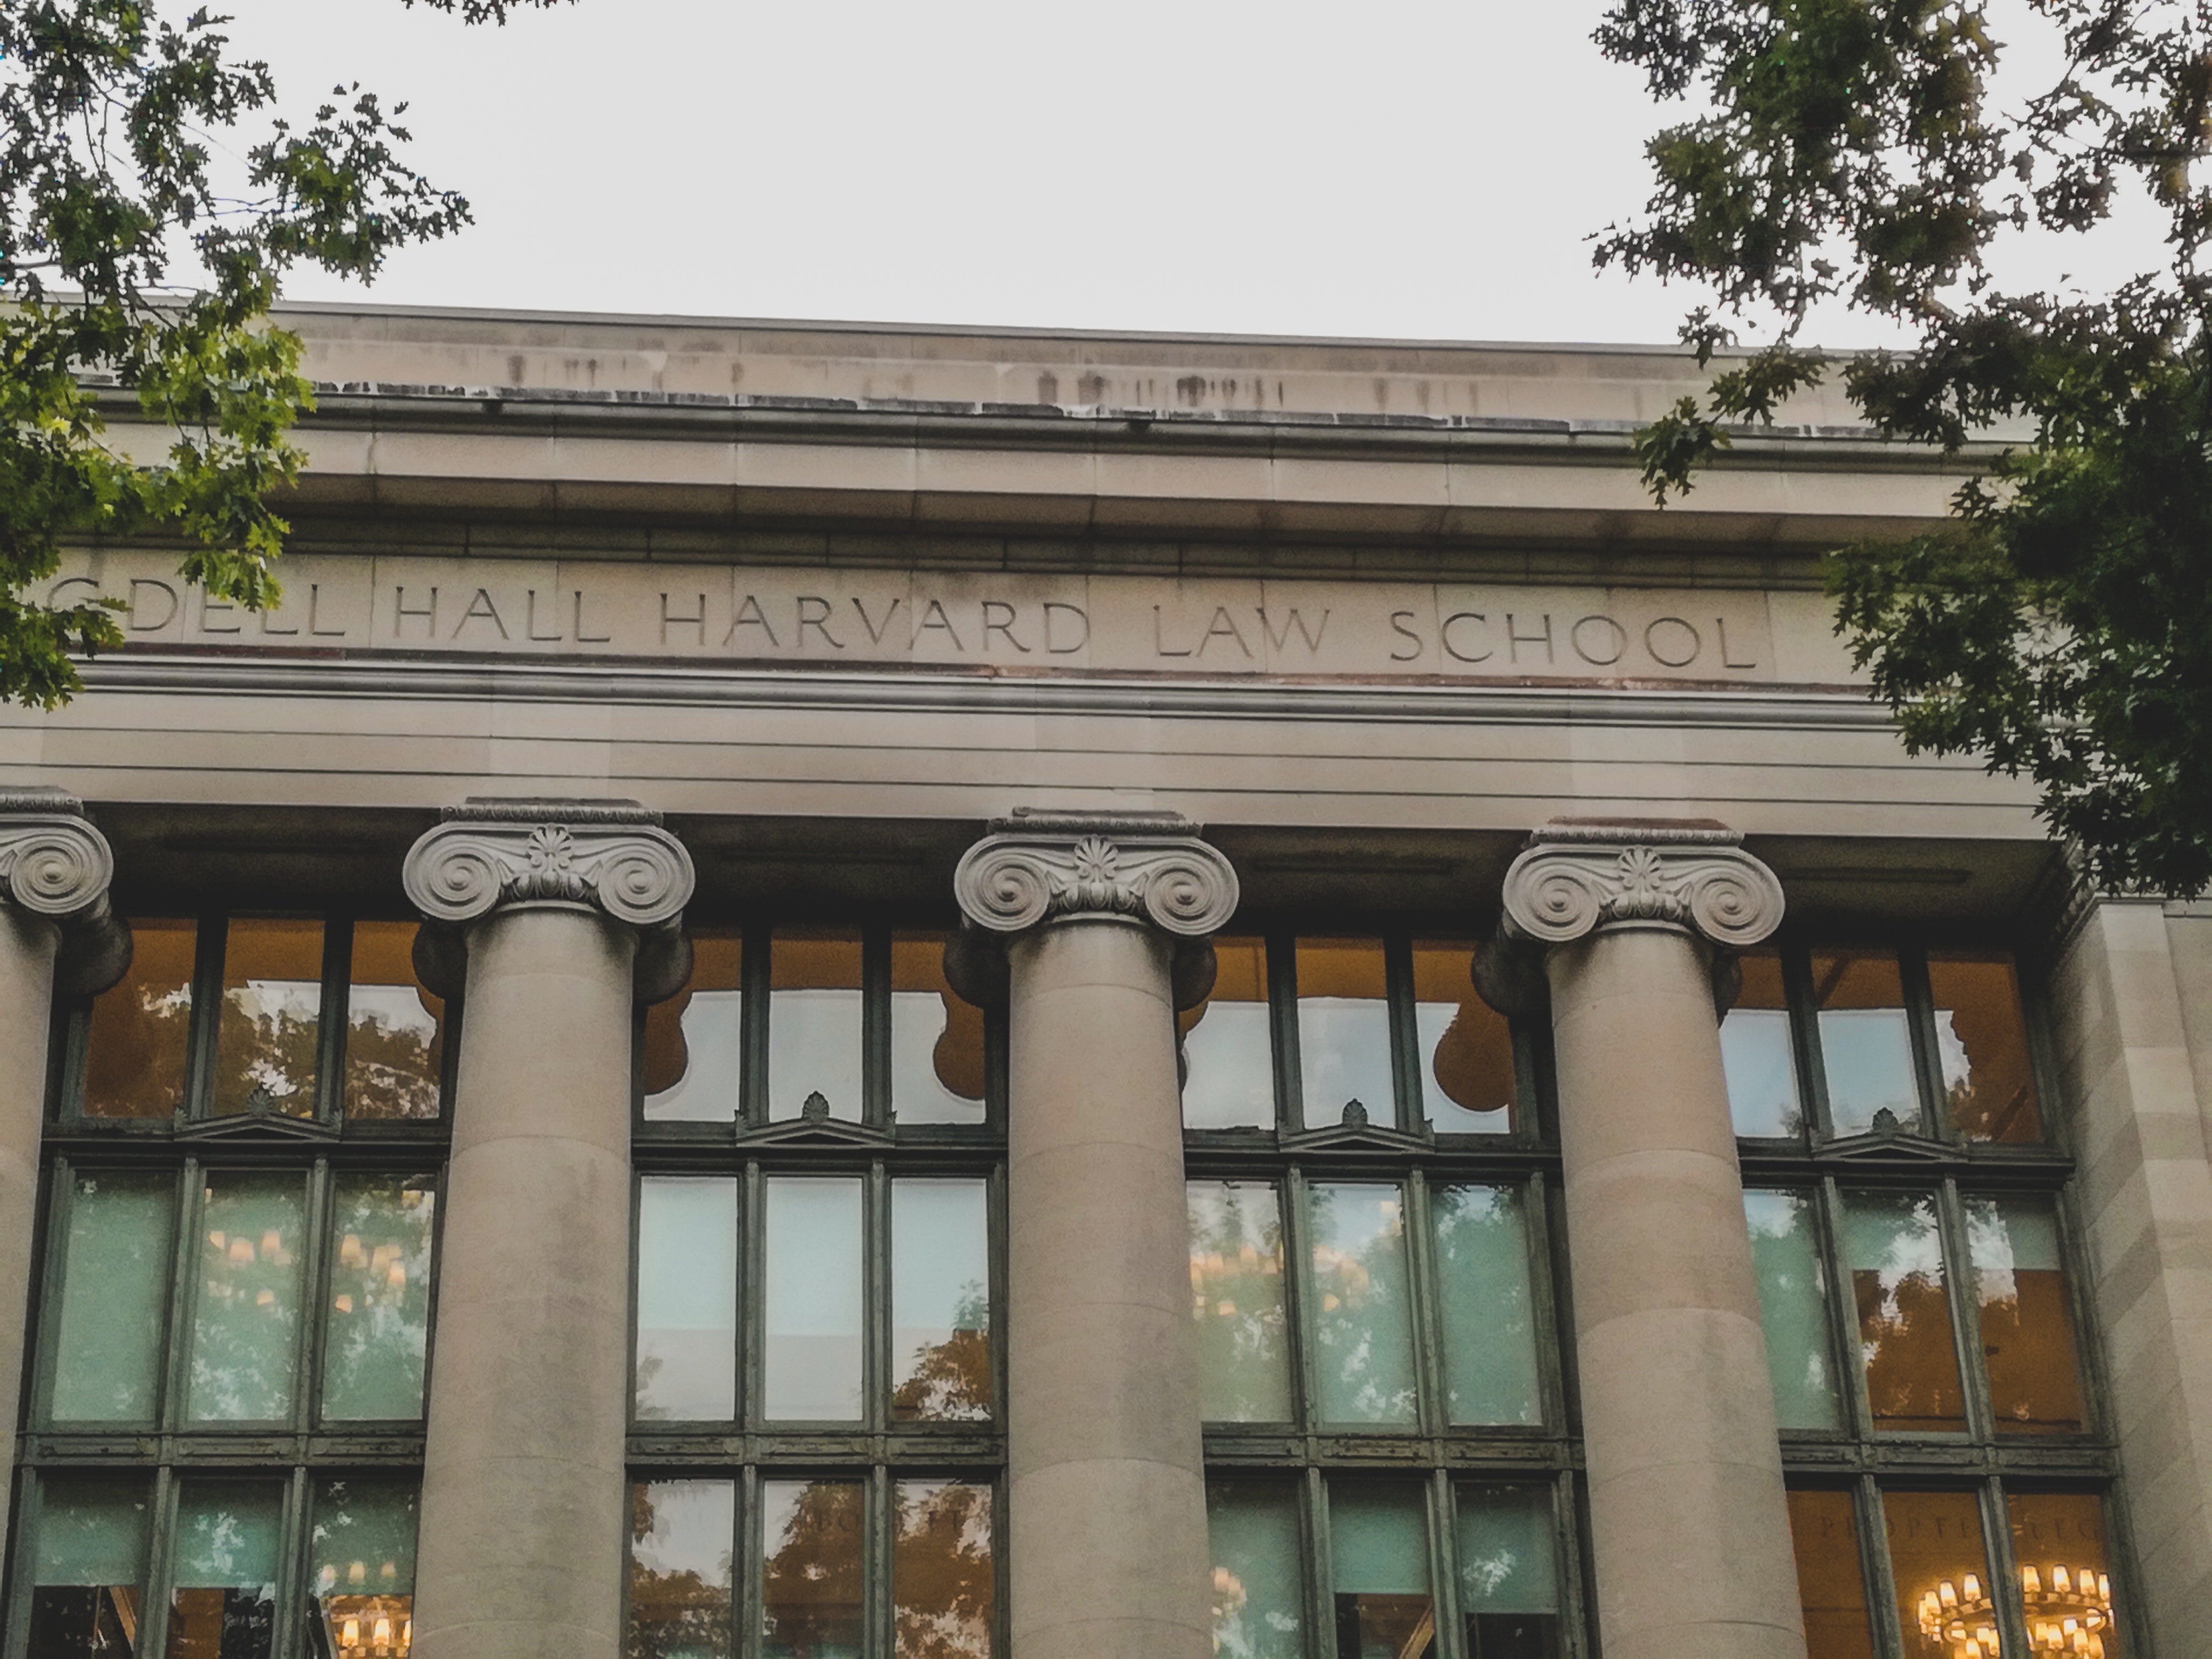 A photo of the facade of the Harvard Law School | Source: Pexels